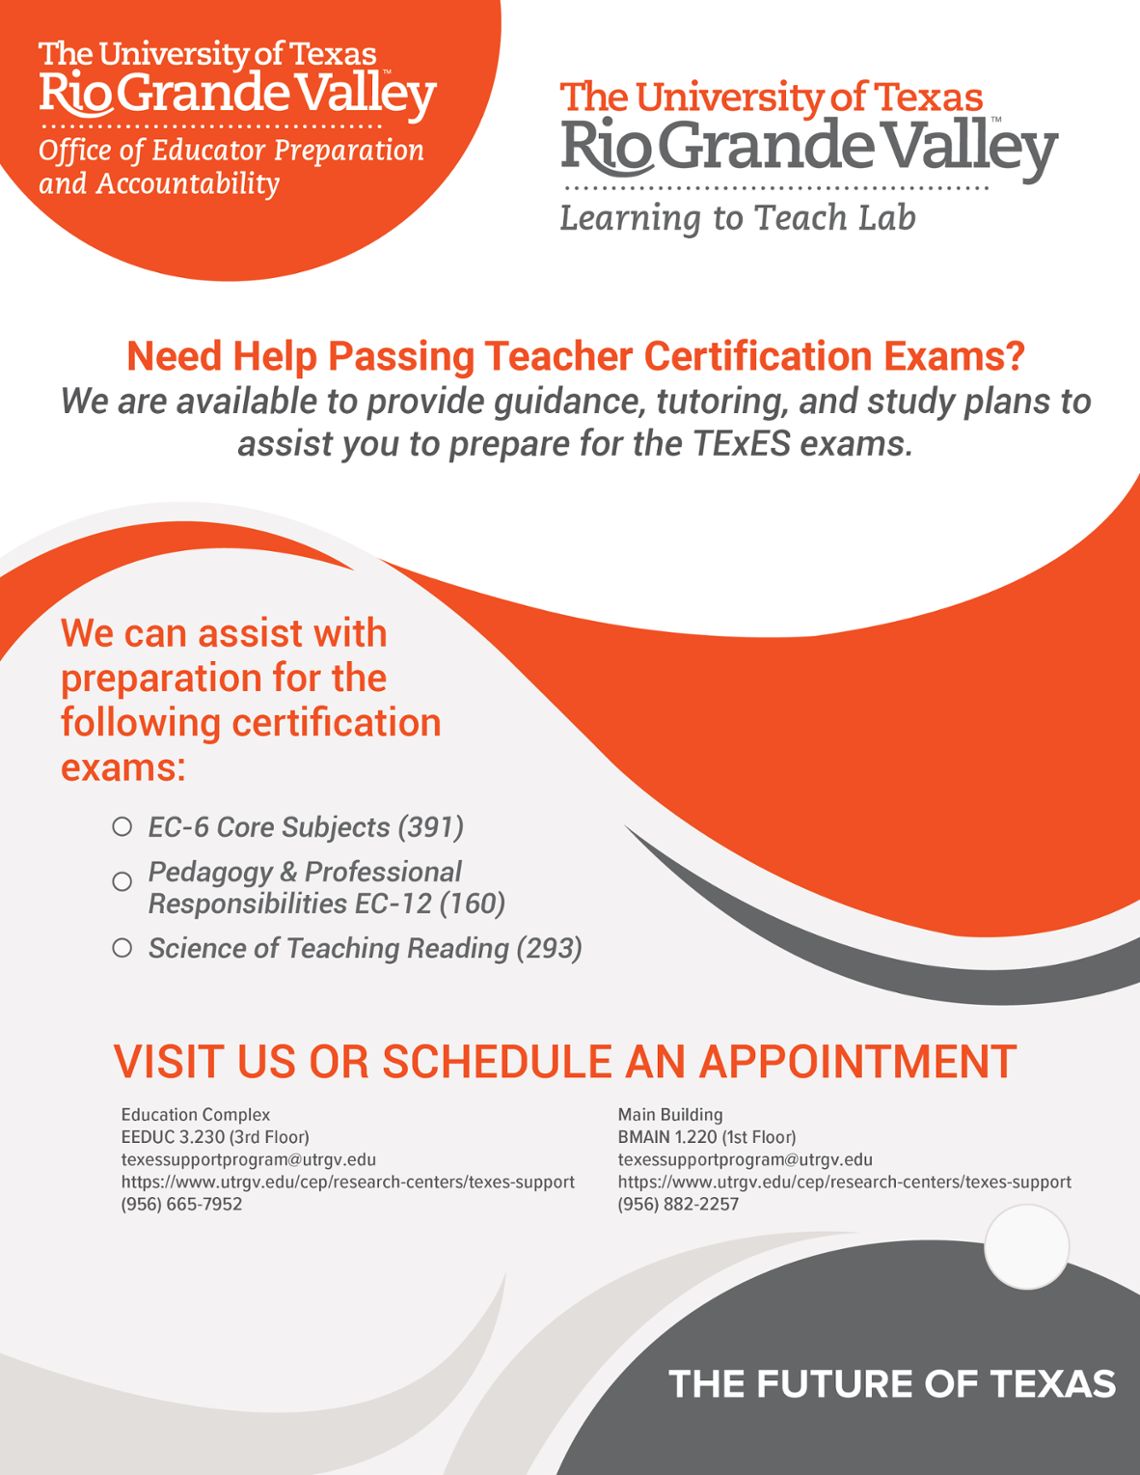 Need Help Passing Teacher Certification Exams - Contact the TExES Support